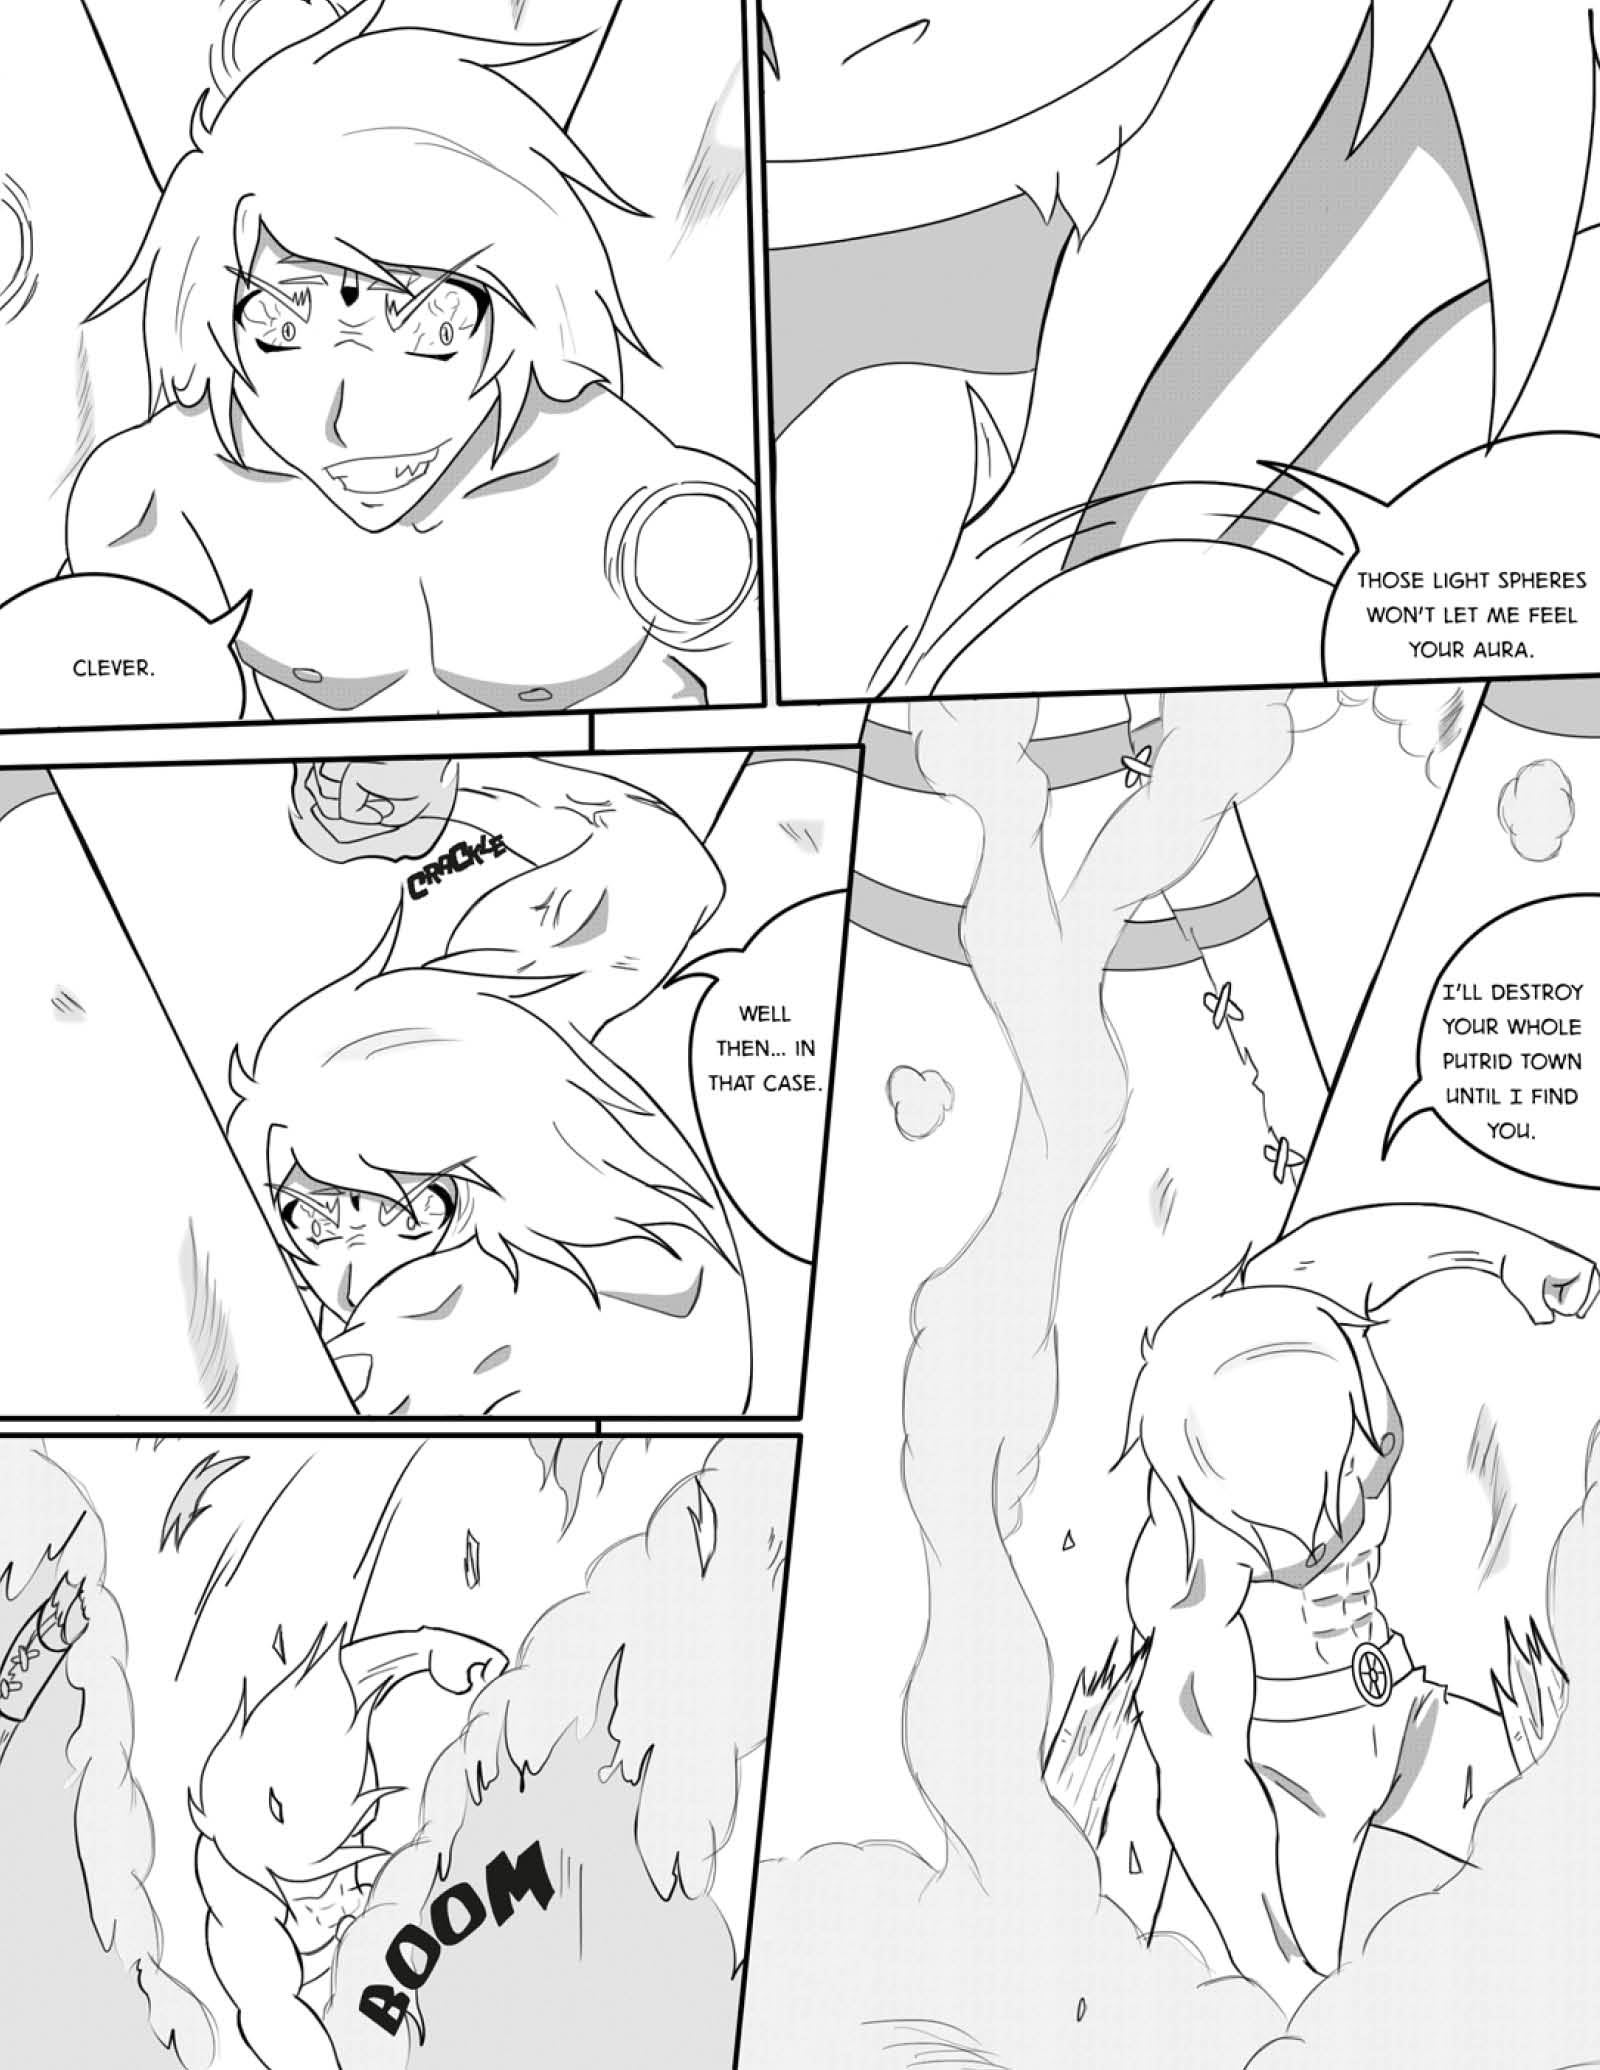 Series Dilan: the Chronicles of Covak - Chapter 7 - Page 20 - Language ENG